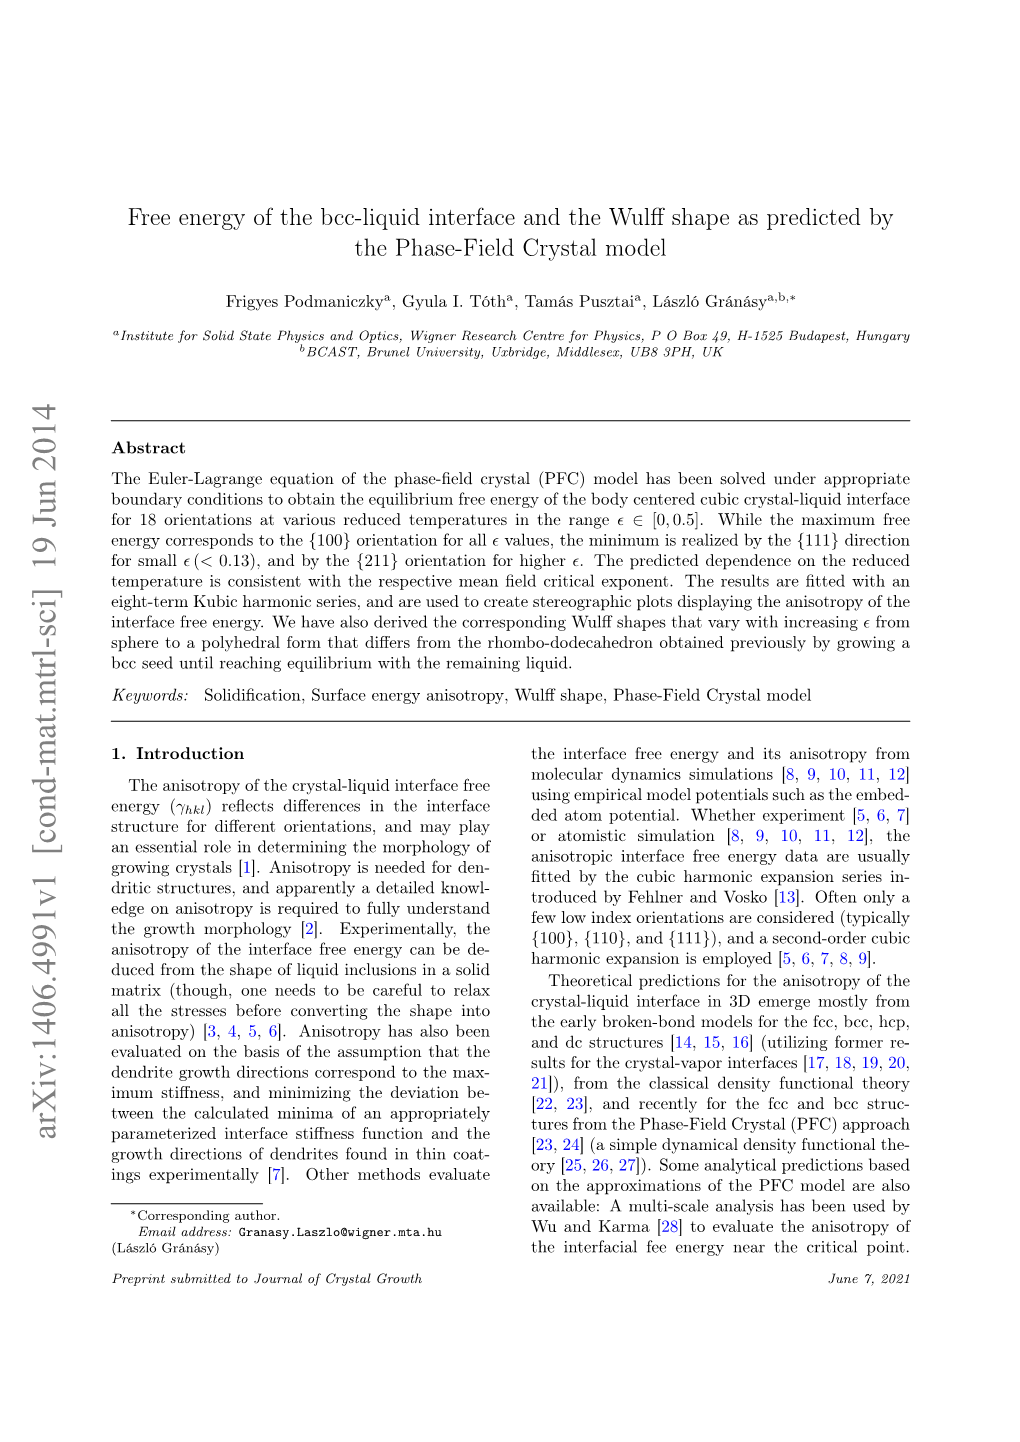 Free Energy of the Bcc-Liquid Interface and the Wulff Shape As Predicted by the Phase-Field Crystal Model